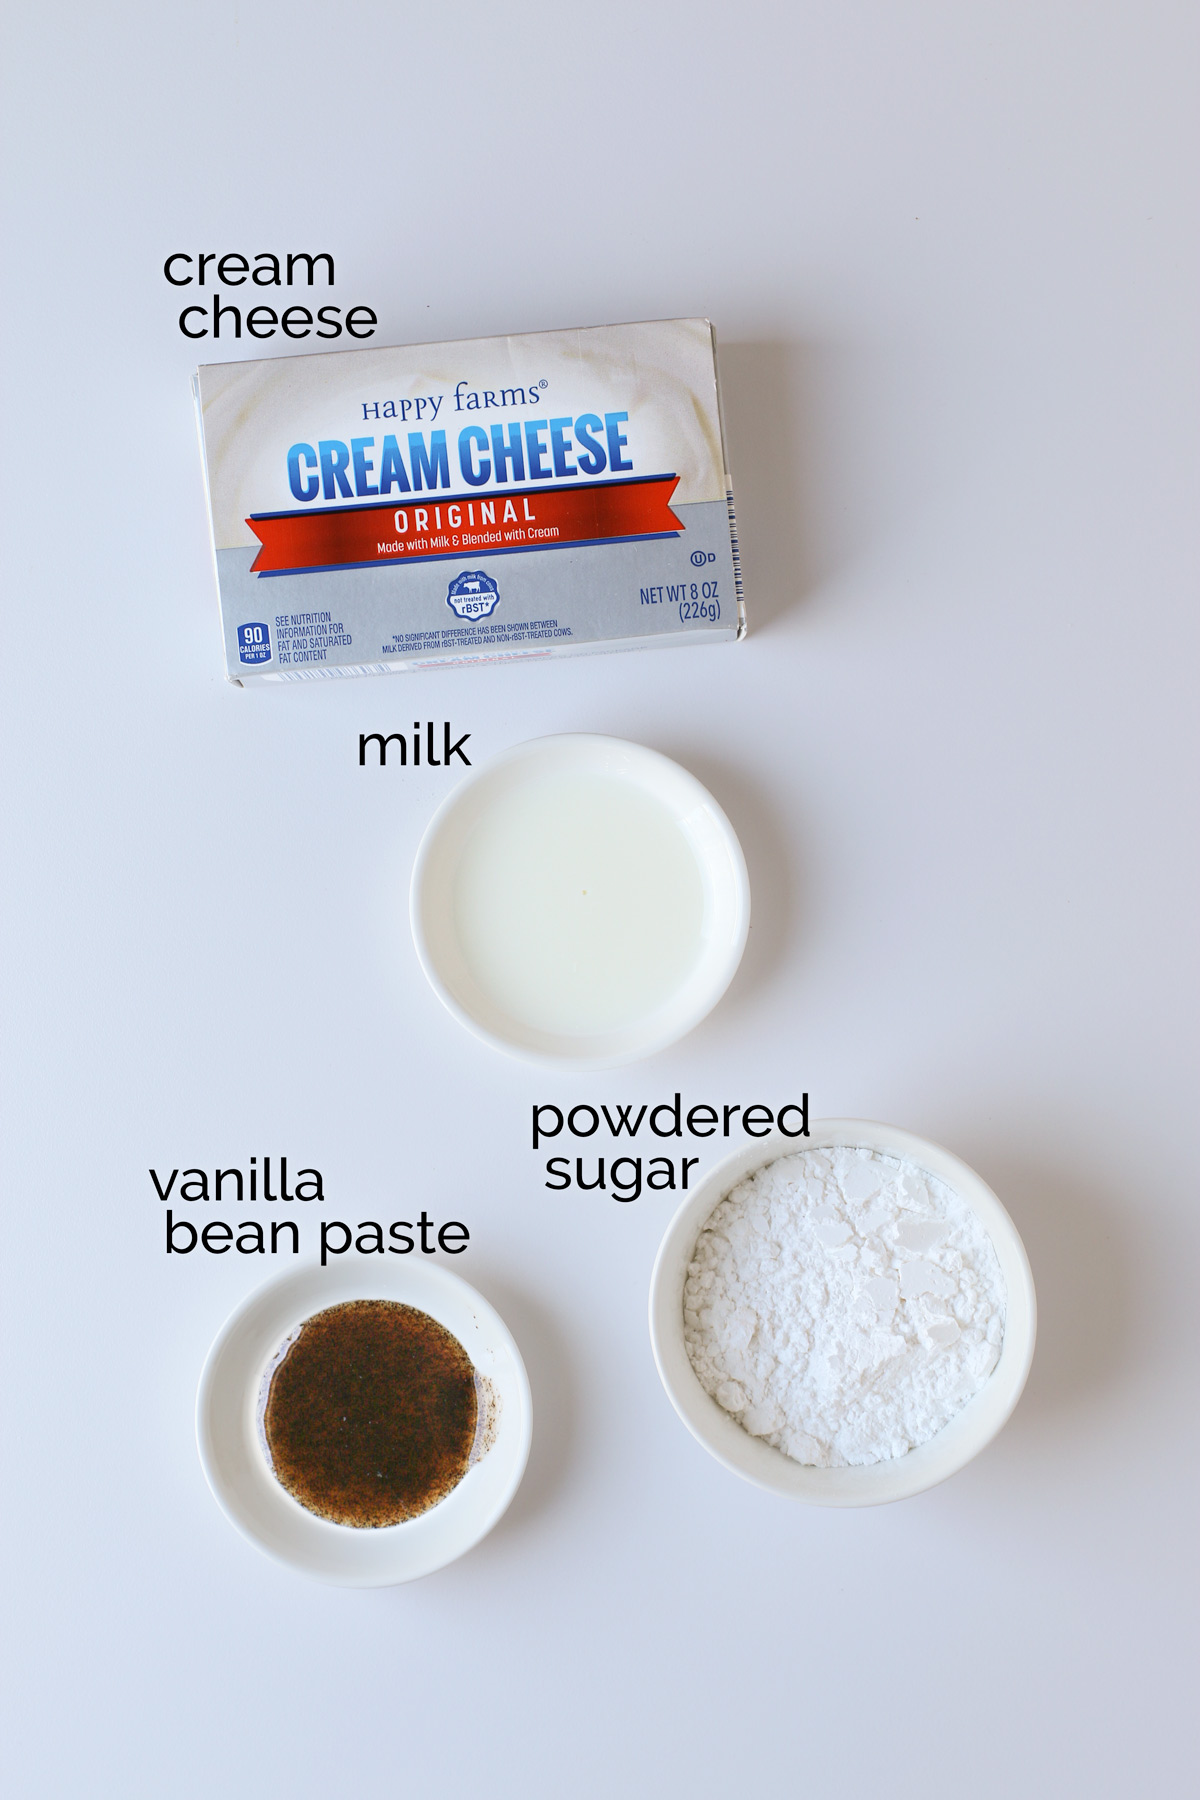 ingredients for sweet cream cheese laid out on white table.